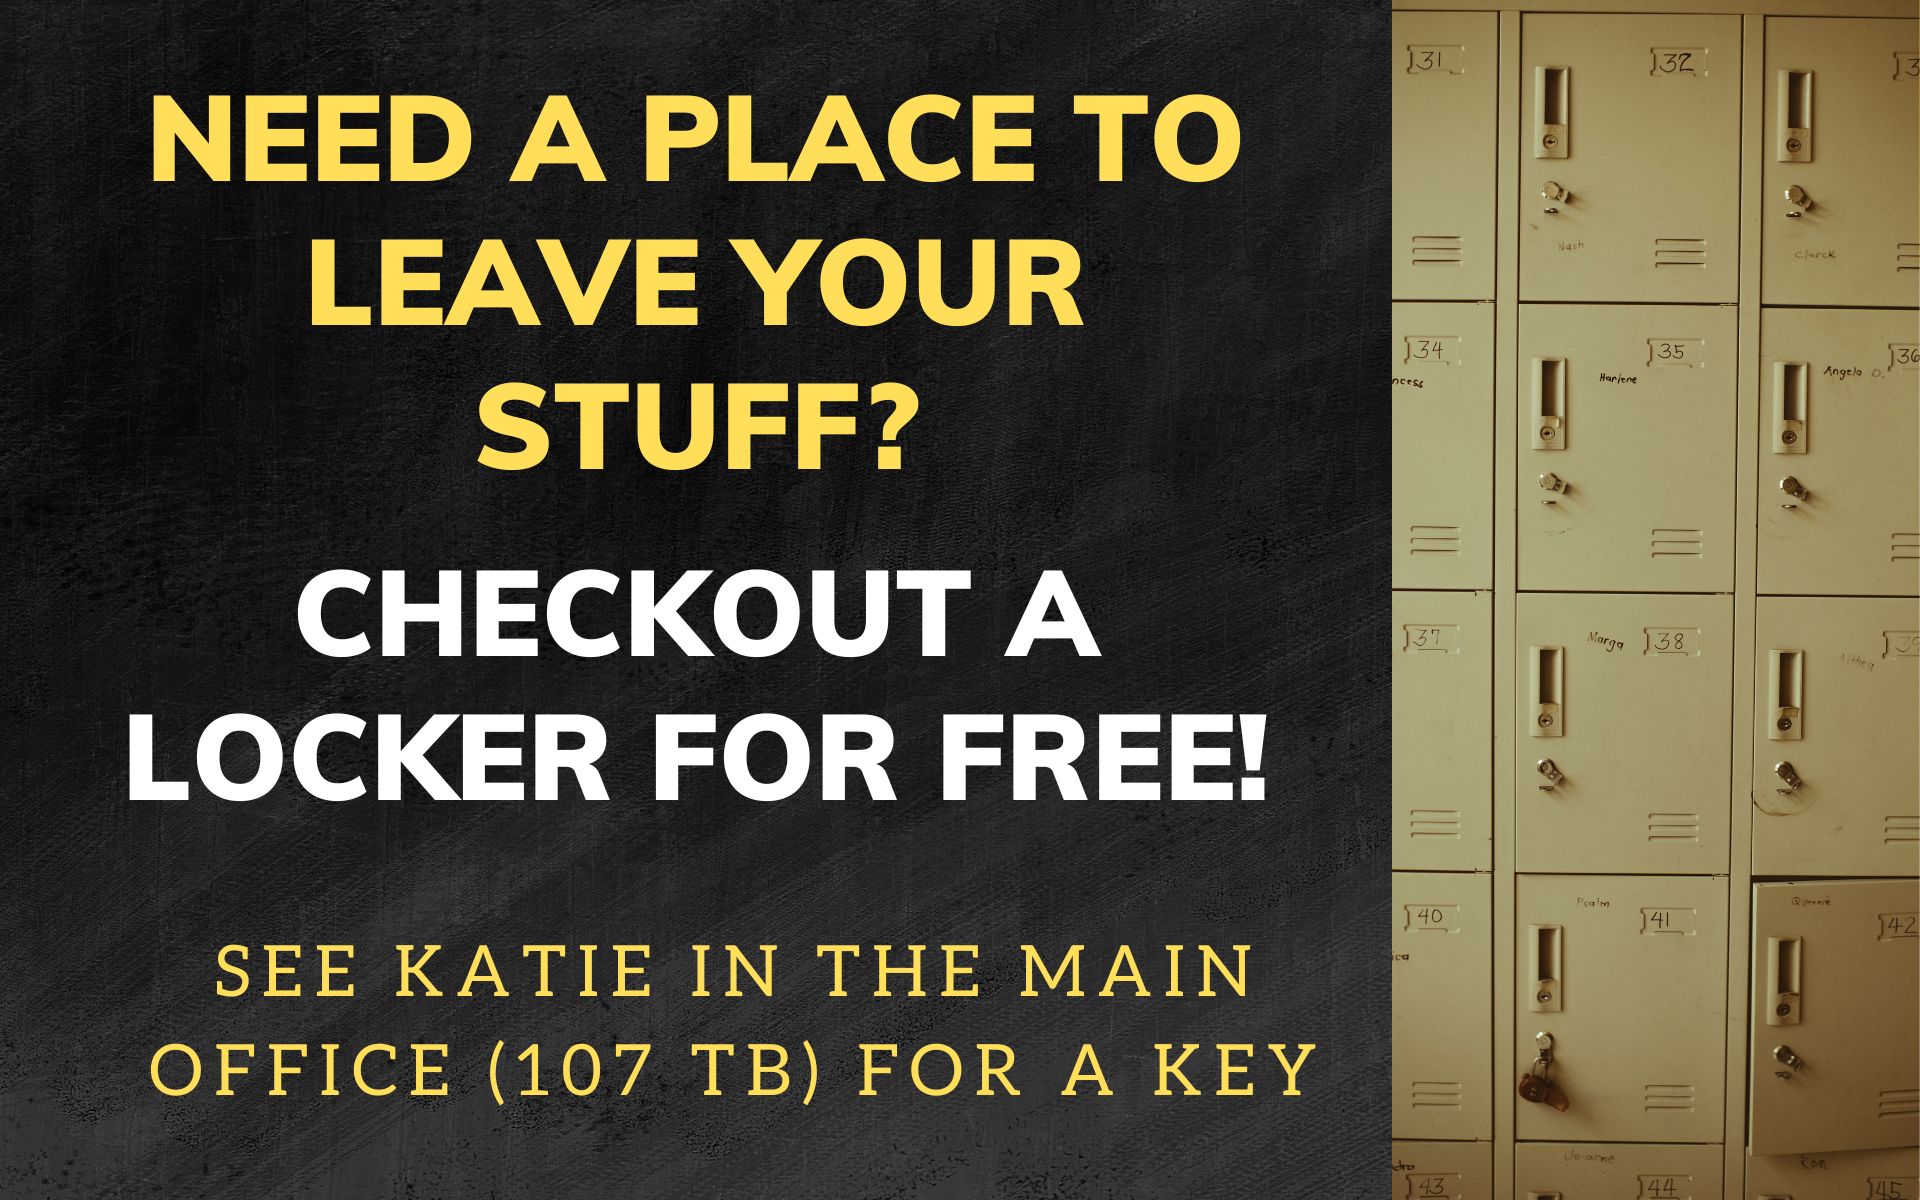 Need a Place to leave your stuff?  Checkout a locker for free